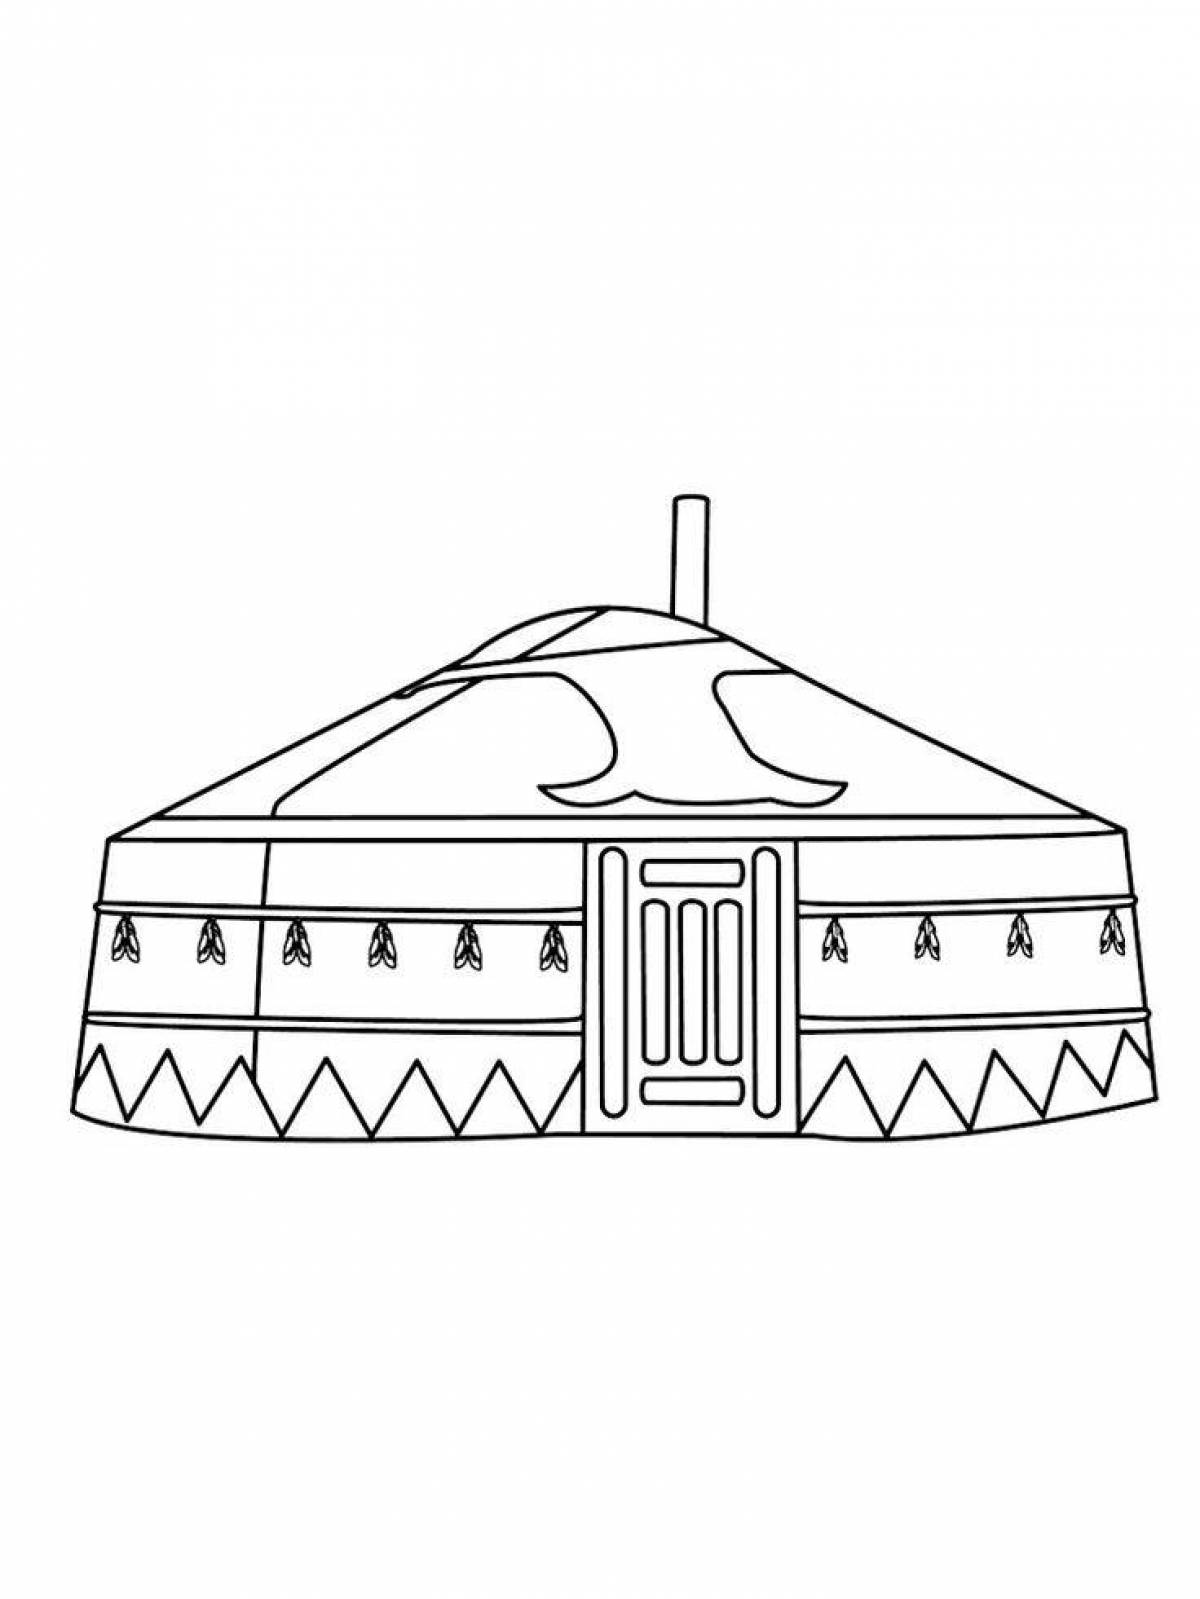 Funny yurt coloring book for babies